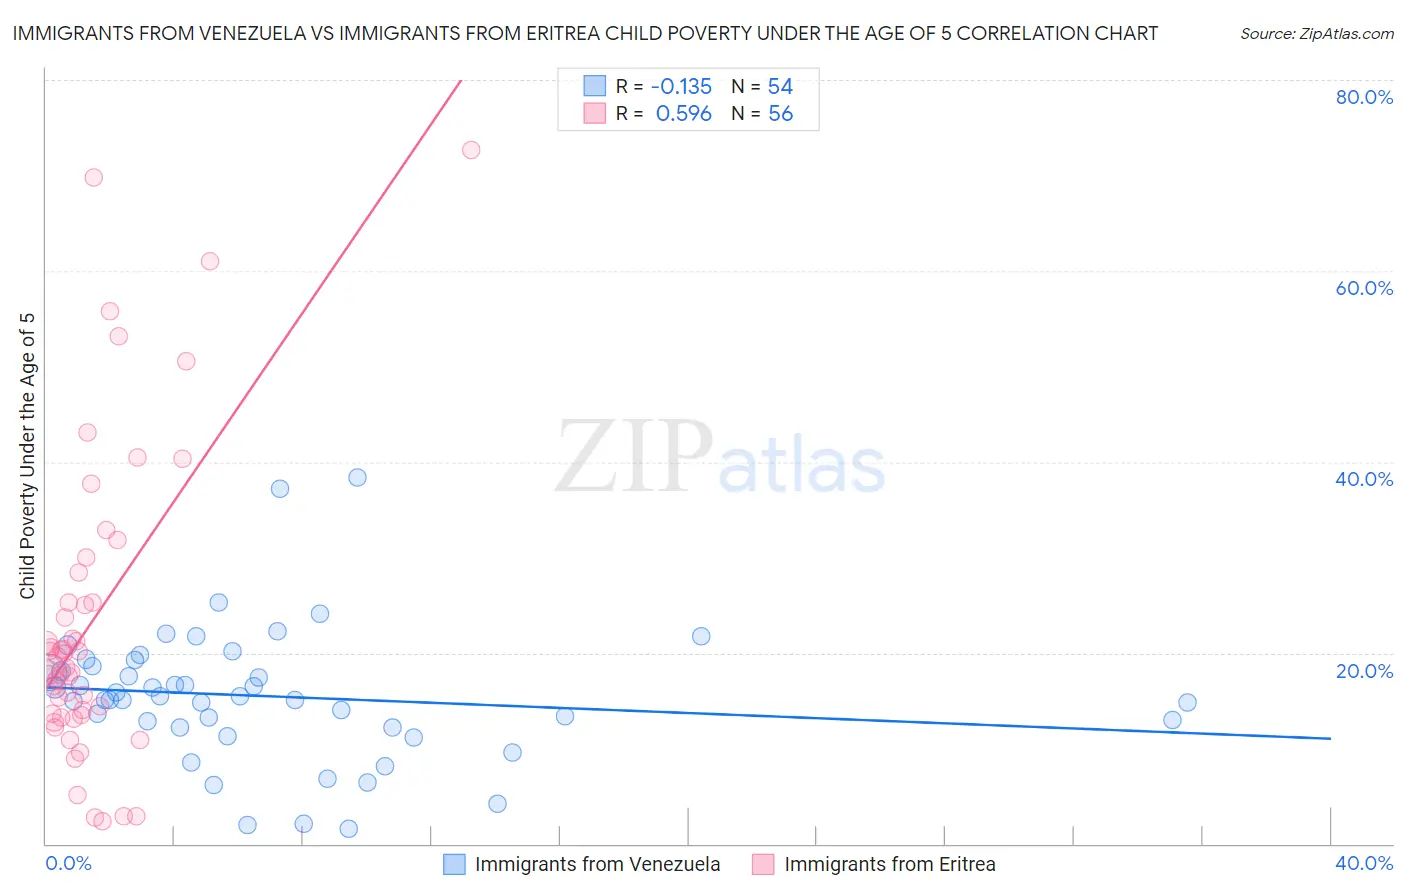 Immigrants from Venezuela vs Immigrants from Eritrea Child Poverty Under the Age of 5